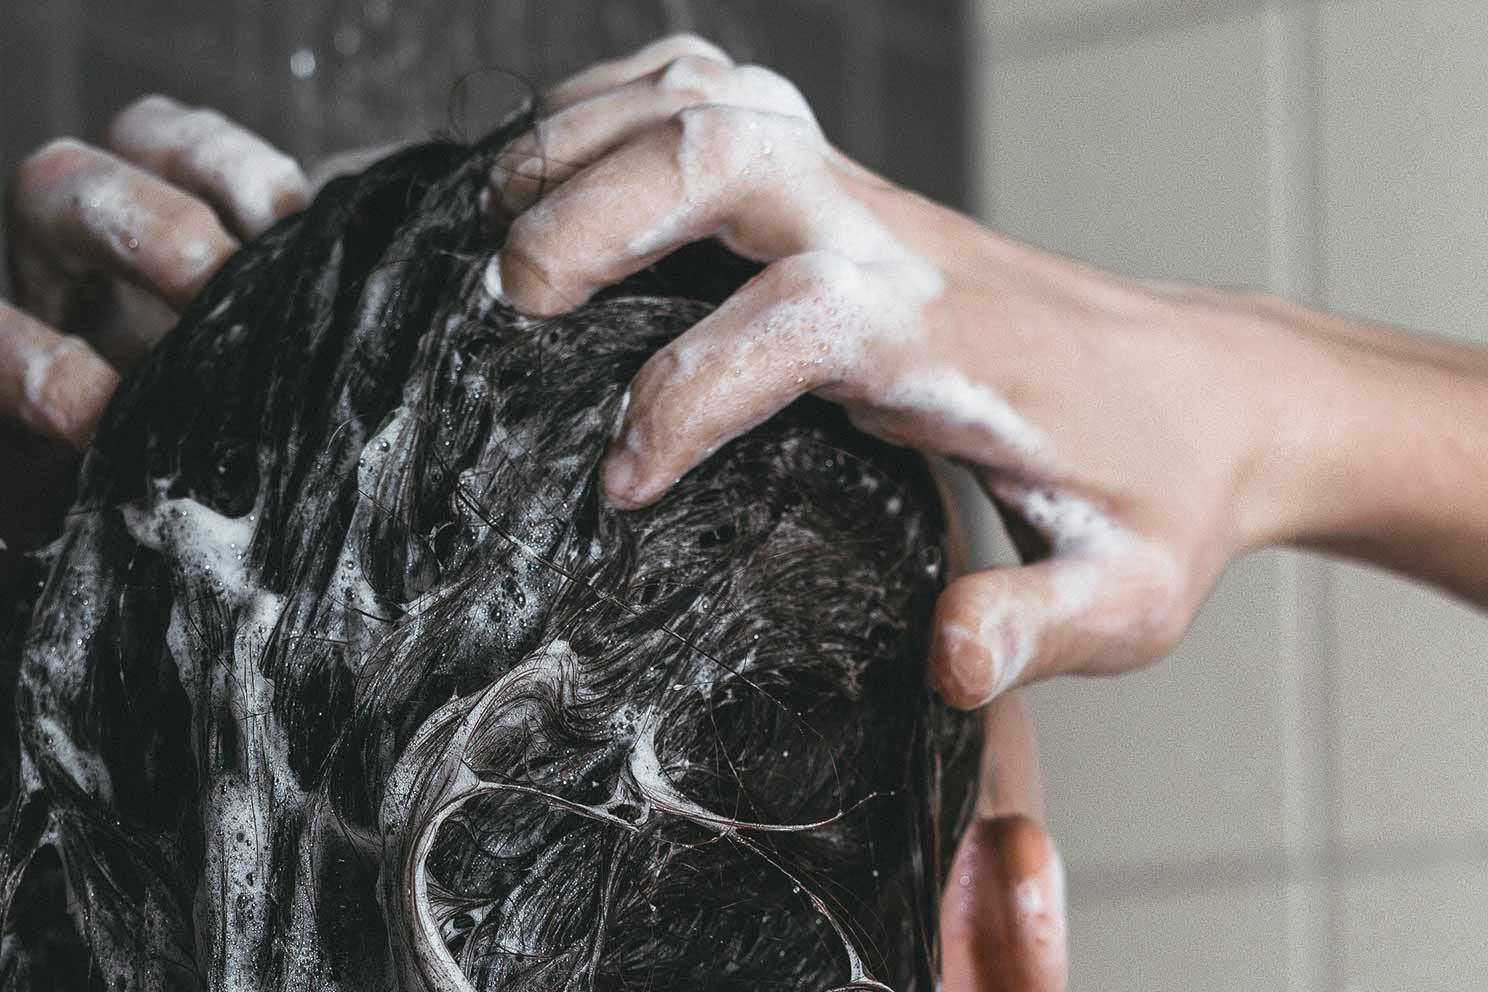 Here’s what 6 experts have to say about sulfates in shampoo